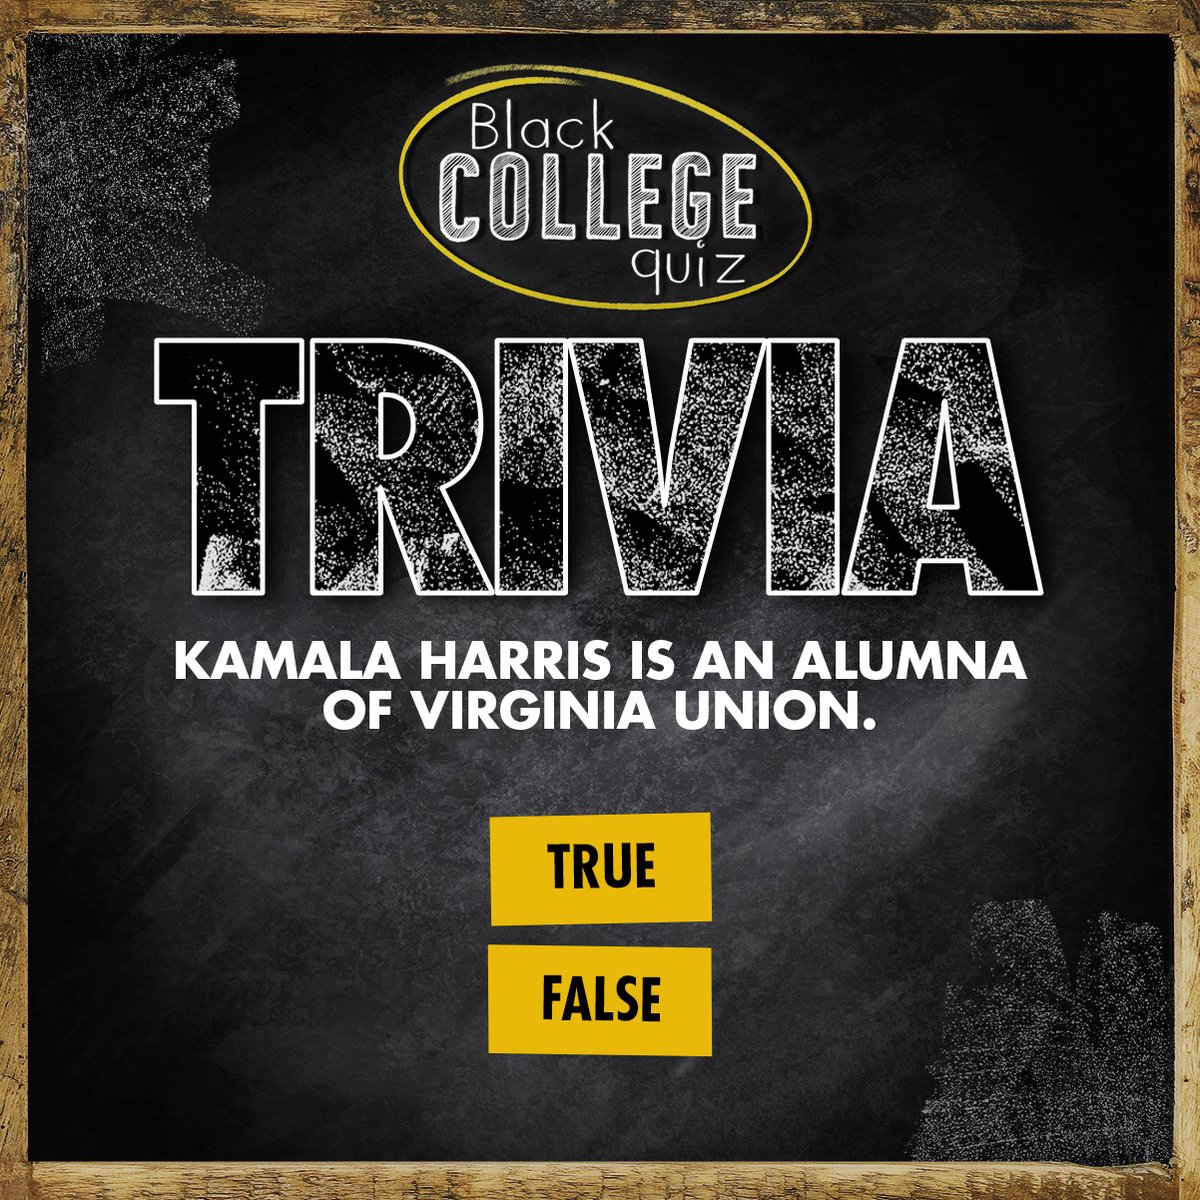 Here's a @blkcollegequiz trivia question: TRUE OR FALSE: KAMALA HARRIS IS AN ALUMNA OF VIRGINIA UNION. Drop your guesses below! 💭✍️ Don't forget to come back on Monday for the big reveal! #BlackCollegeQuiz #TriviaChallenge #BrainyVibes